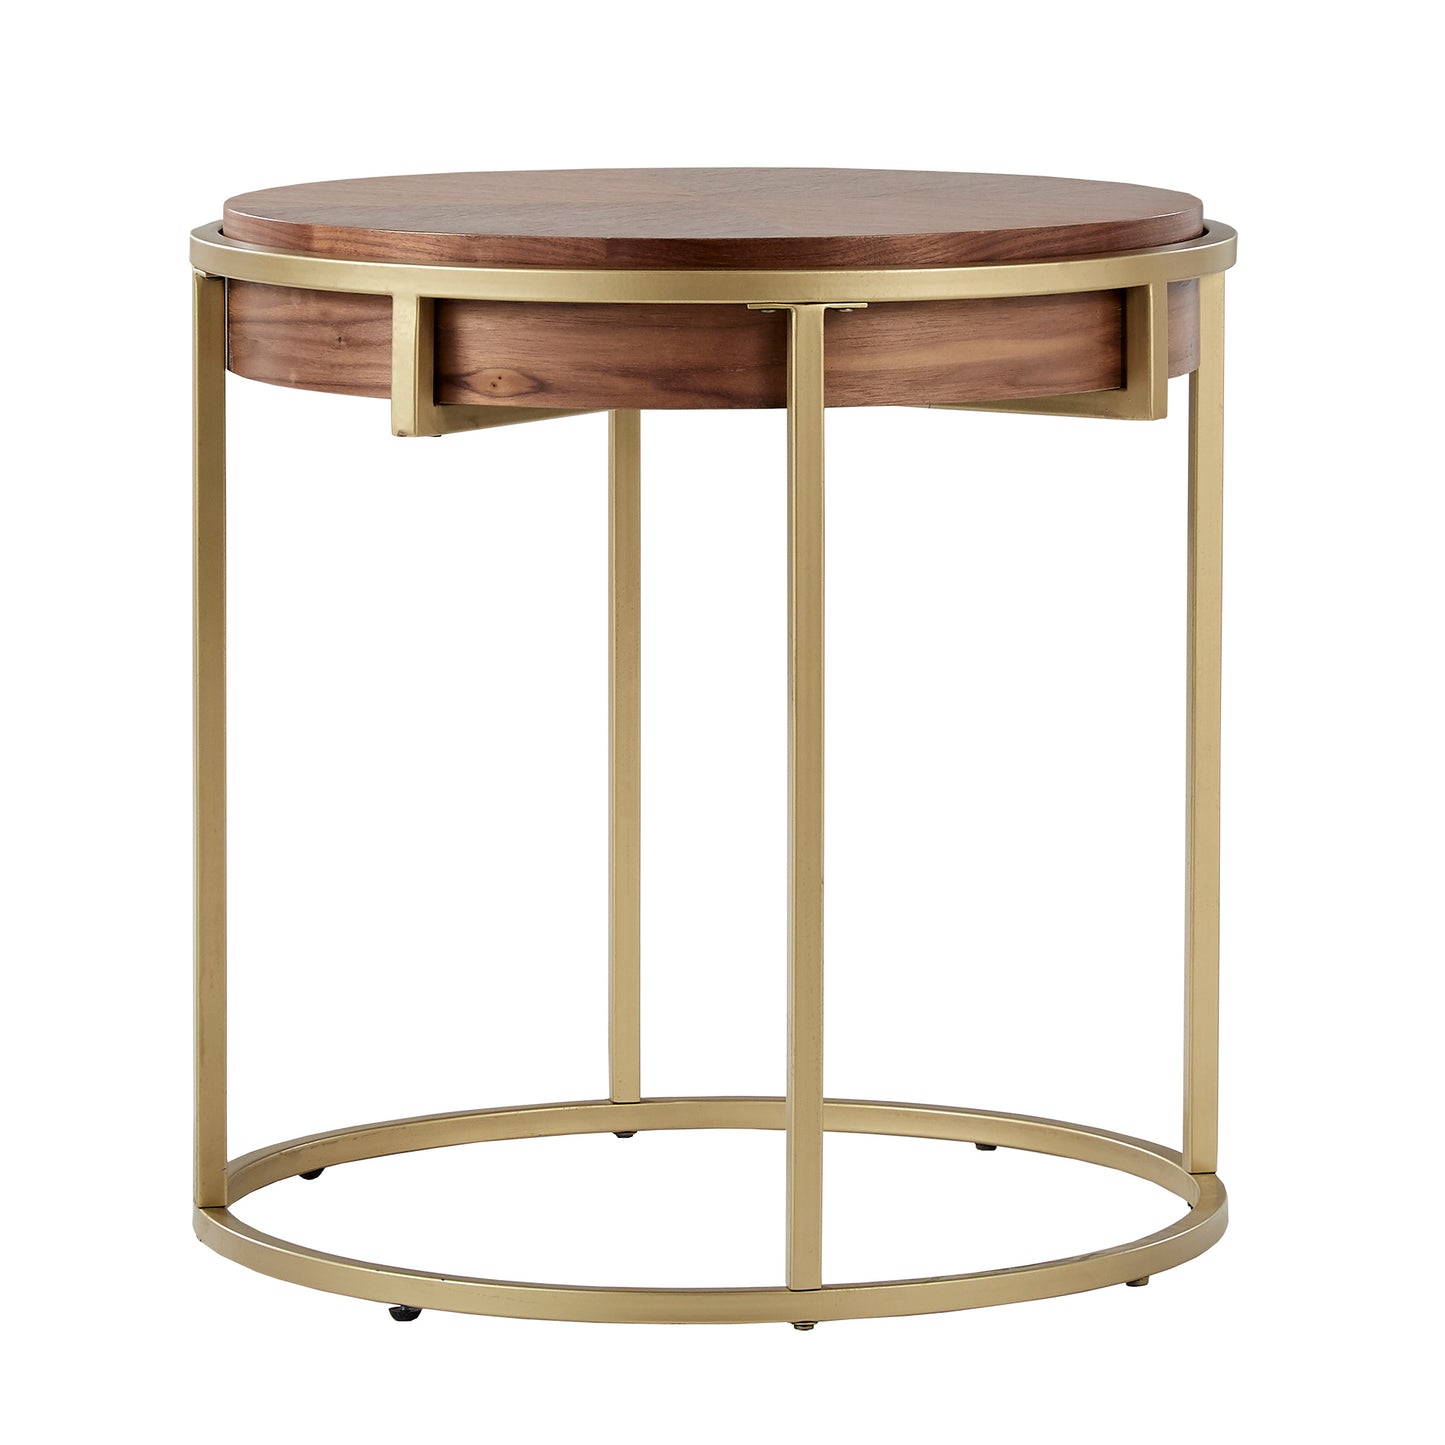 Round End Table with Metal Base - Natural Finish, Gold Base